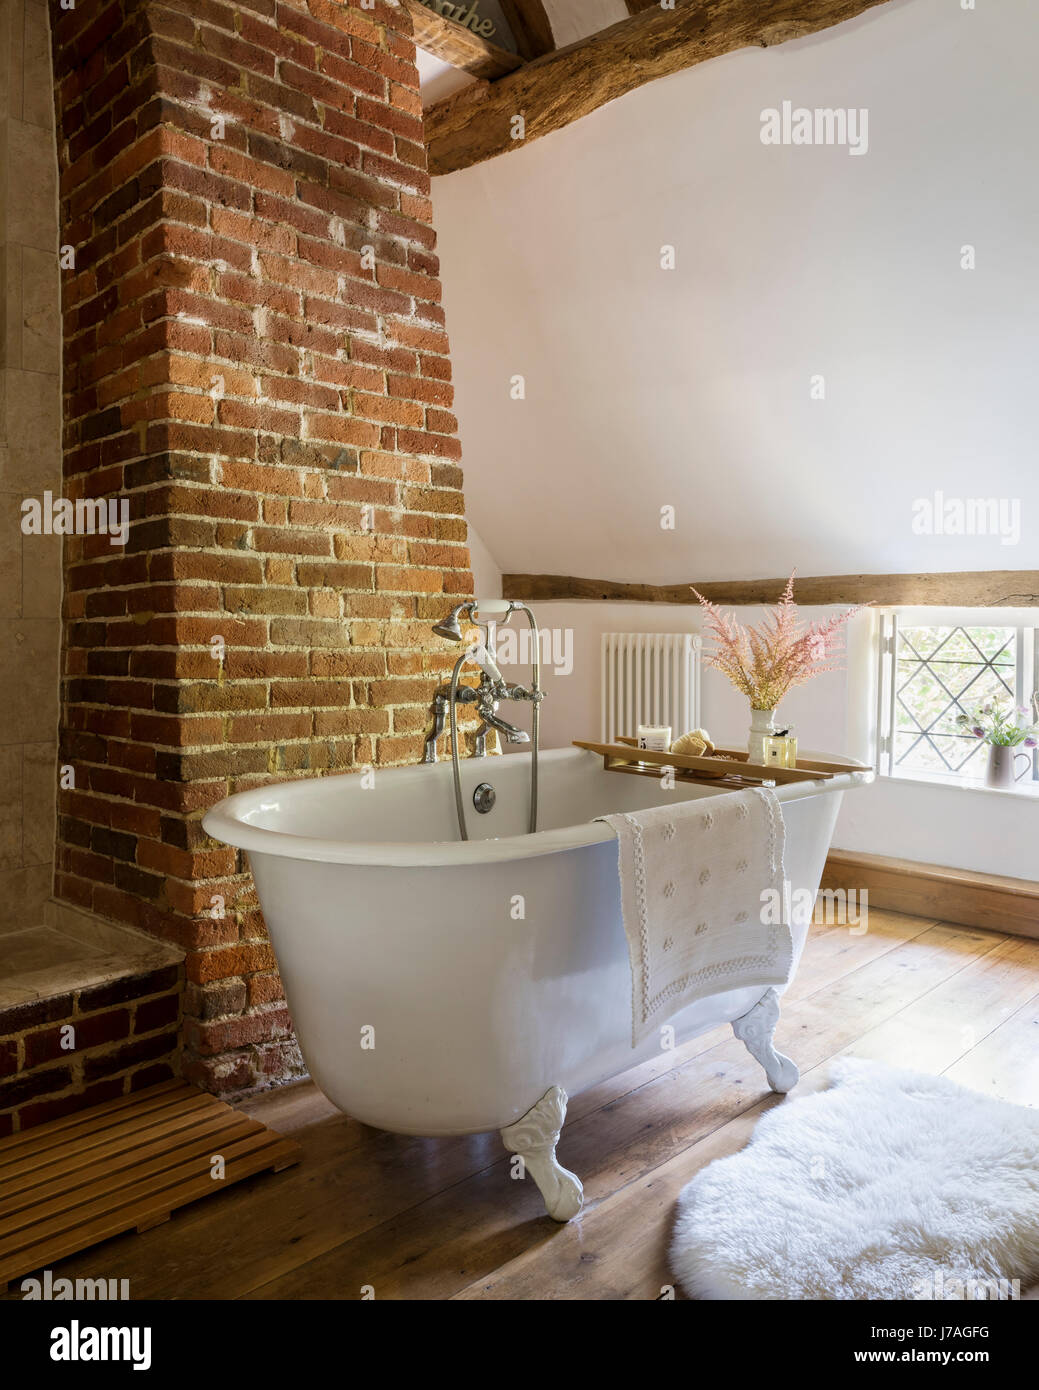 Vaulted bathroom with ancient beams, exposed brick wall and roll-top French bath. Stock Photo